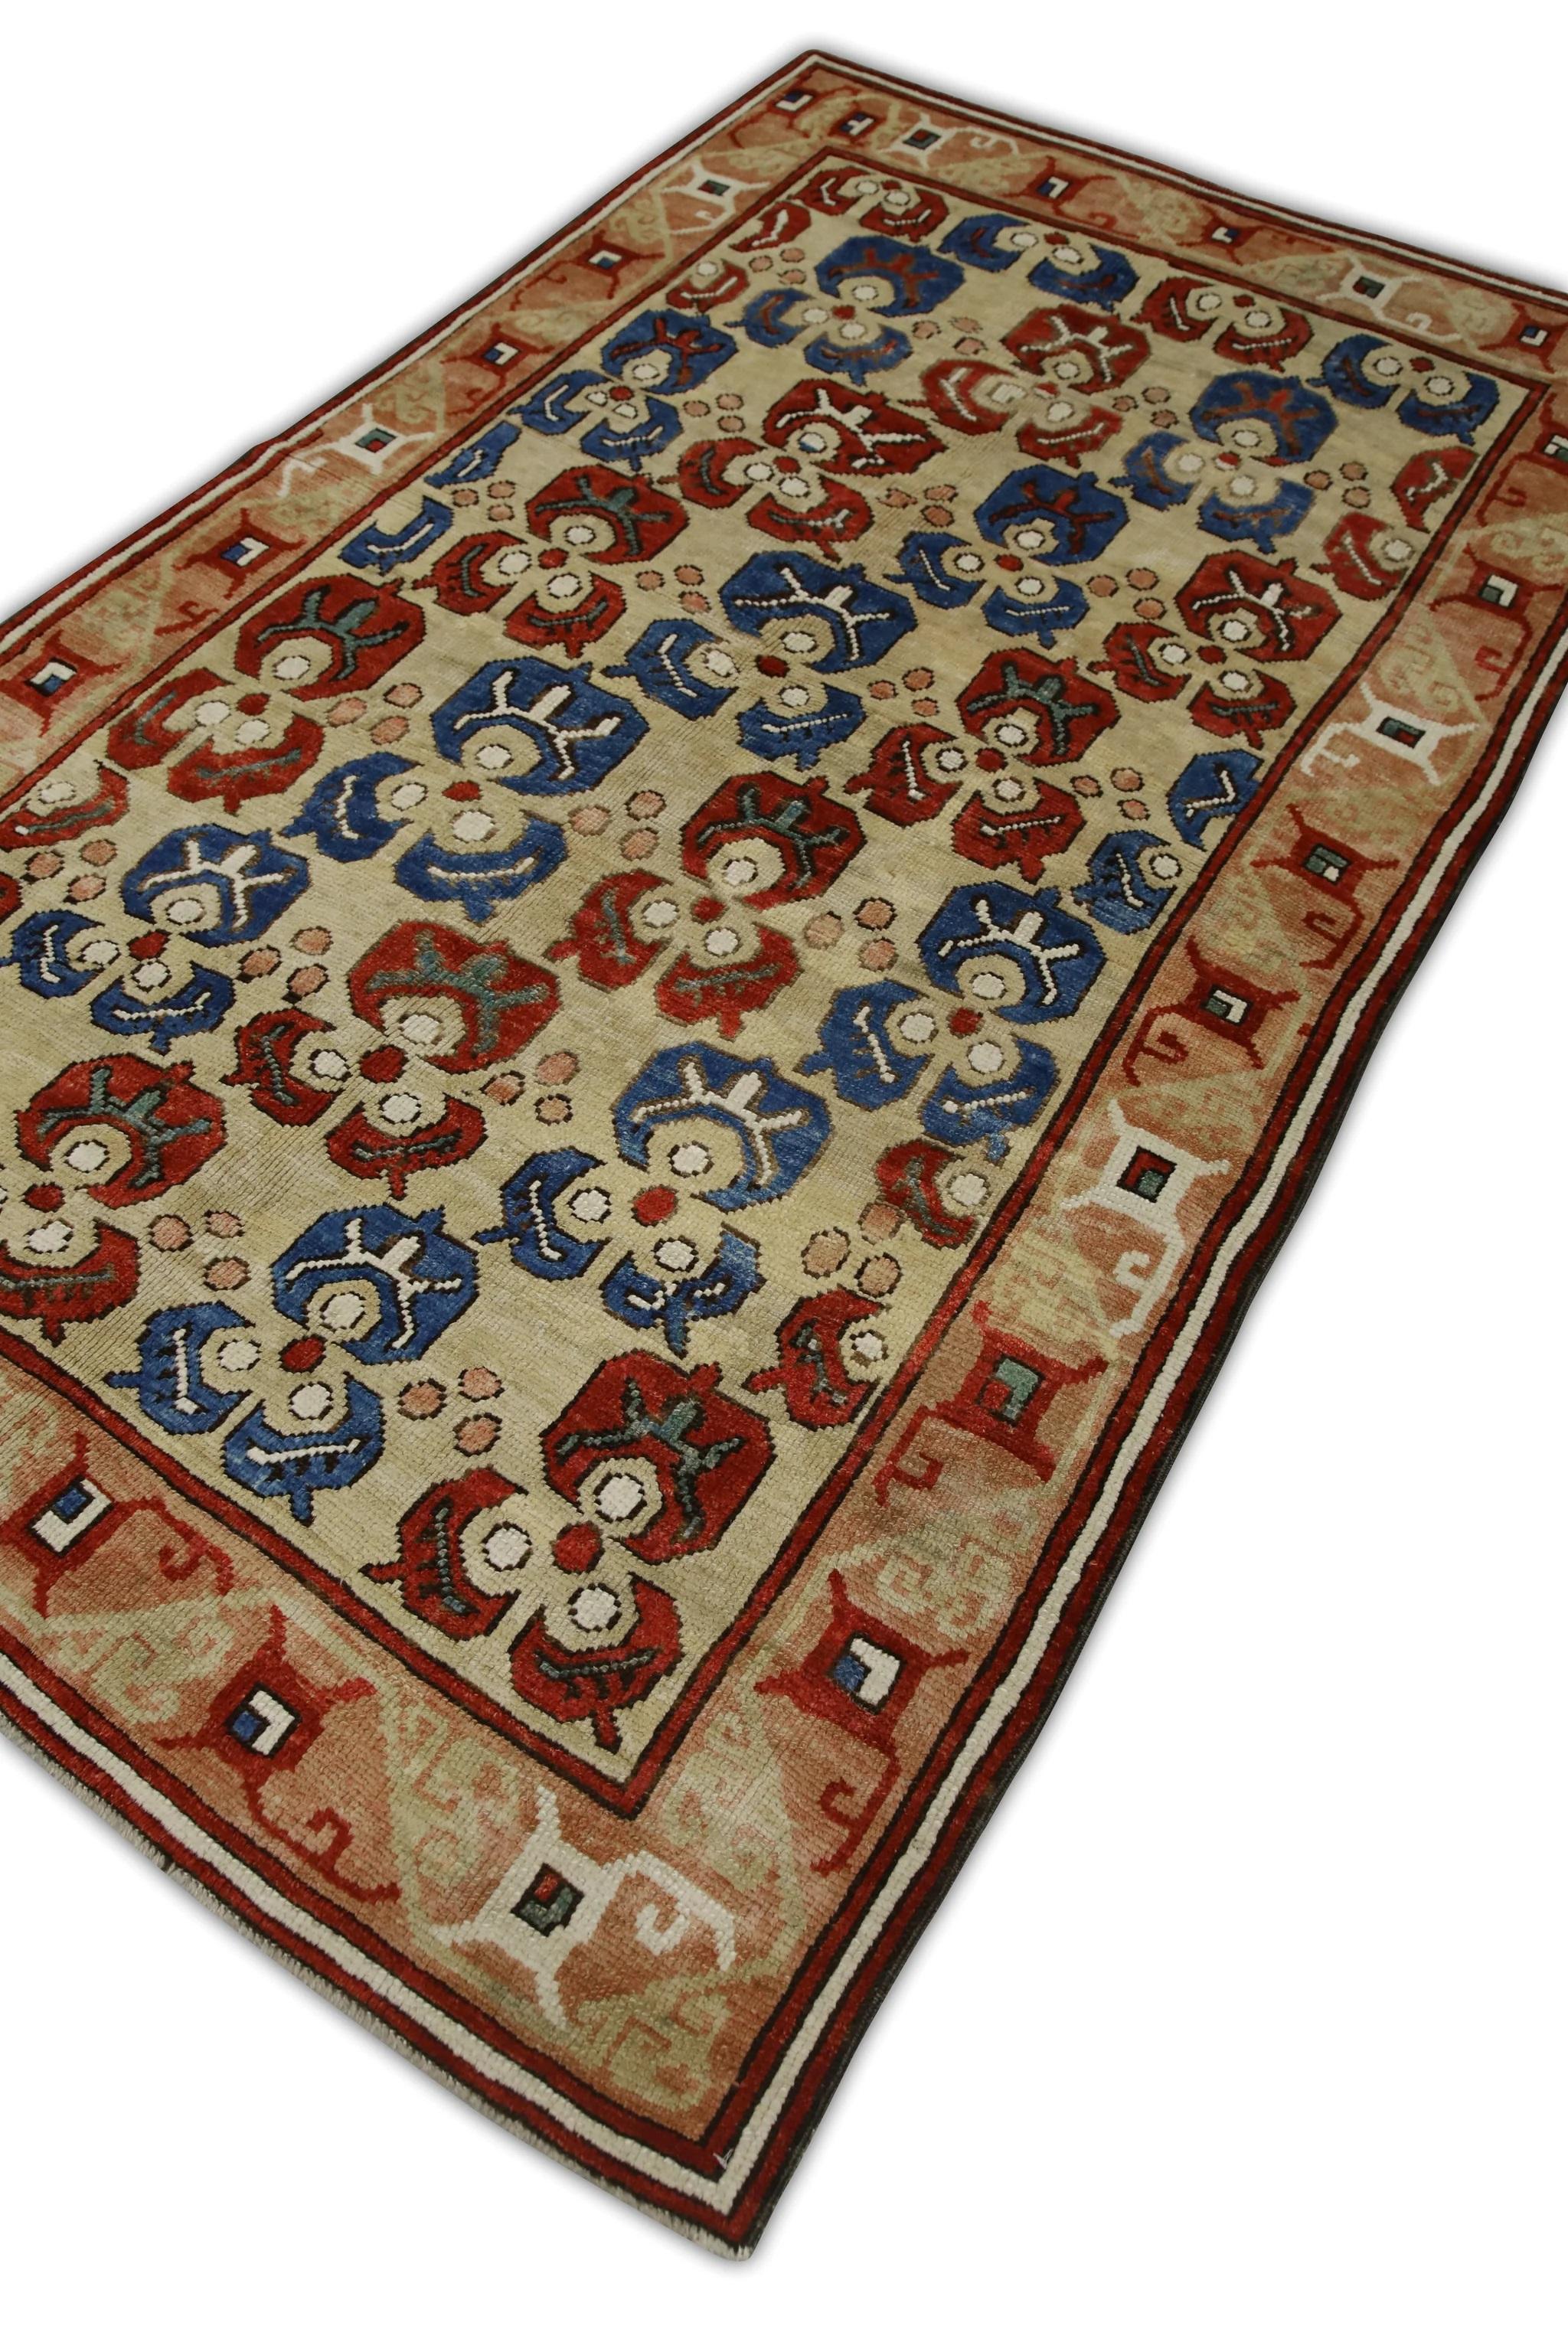 This exquisite vintage traditional finewoven Turkish Oushak rug is a stunning example of traditional craftsmanship and timeless beauty. Hand-knotted from premium wool fibers, this rug features intricate patterns and vivid colors that are all